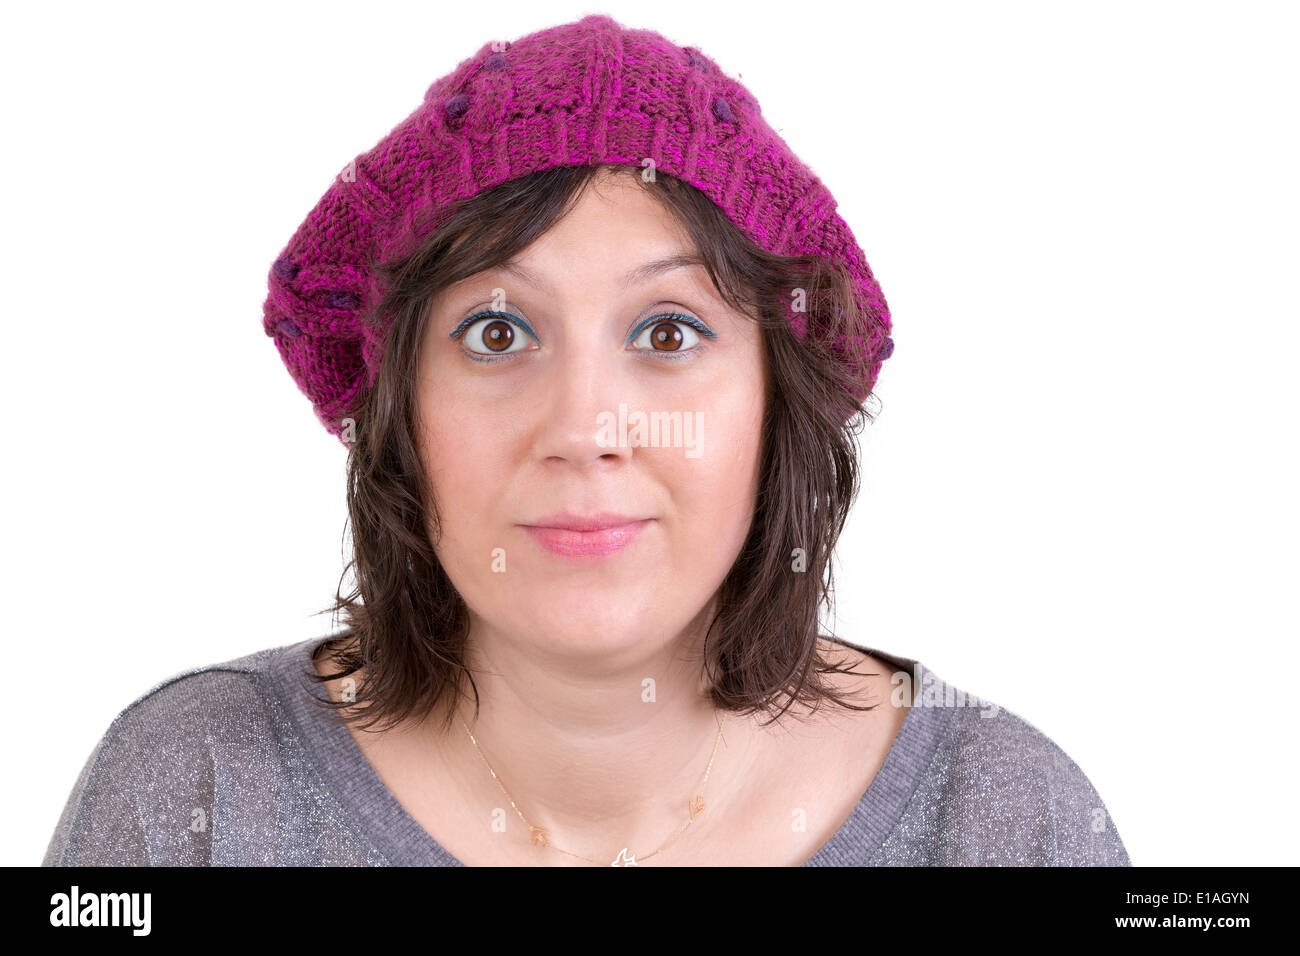 Attractive woman wearing a purple knitted winter cap opening her eyes wide in astonishment and skepticism to show her disbelief, Stock Photo